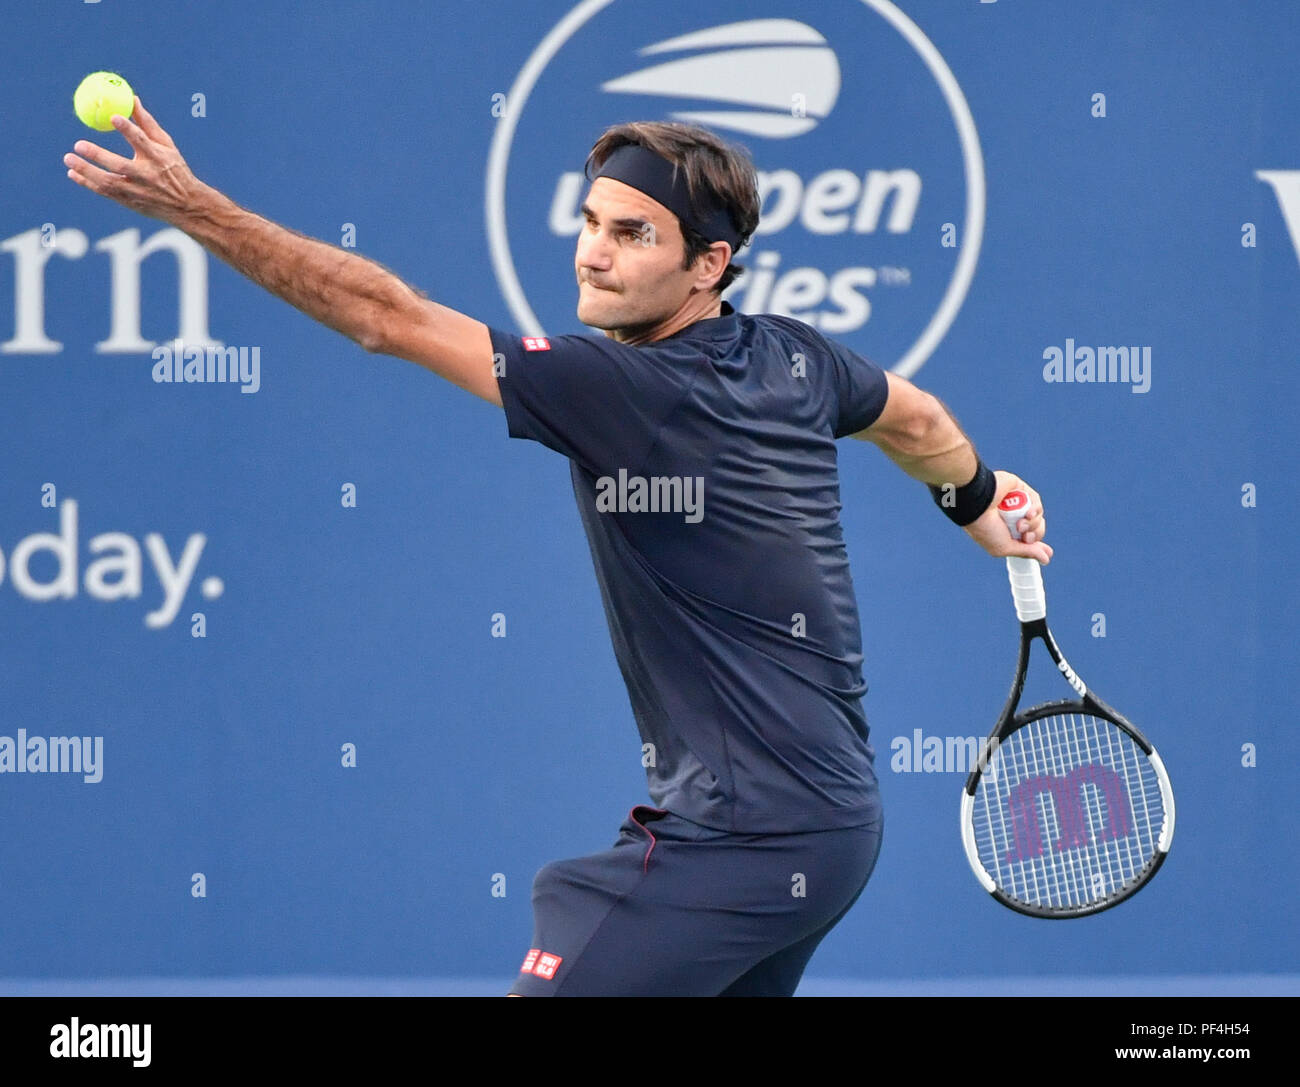 Ohio, USA. 18 August 2018.  Roger Federer (SUI) defeated David Goffin (ESP) 7-6, 1-1, when Goffin retired at the Western & Southern Open being played at Lindner Family Tennis Center in Mason, Ohio. © Leslie Billman/Tennisclix/CSM Credit: Cal Sport Media/Alamy Live News Stock Photo